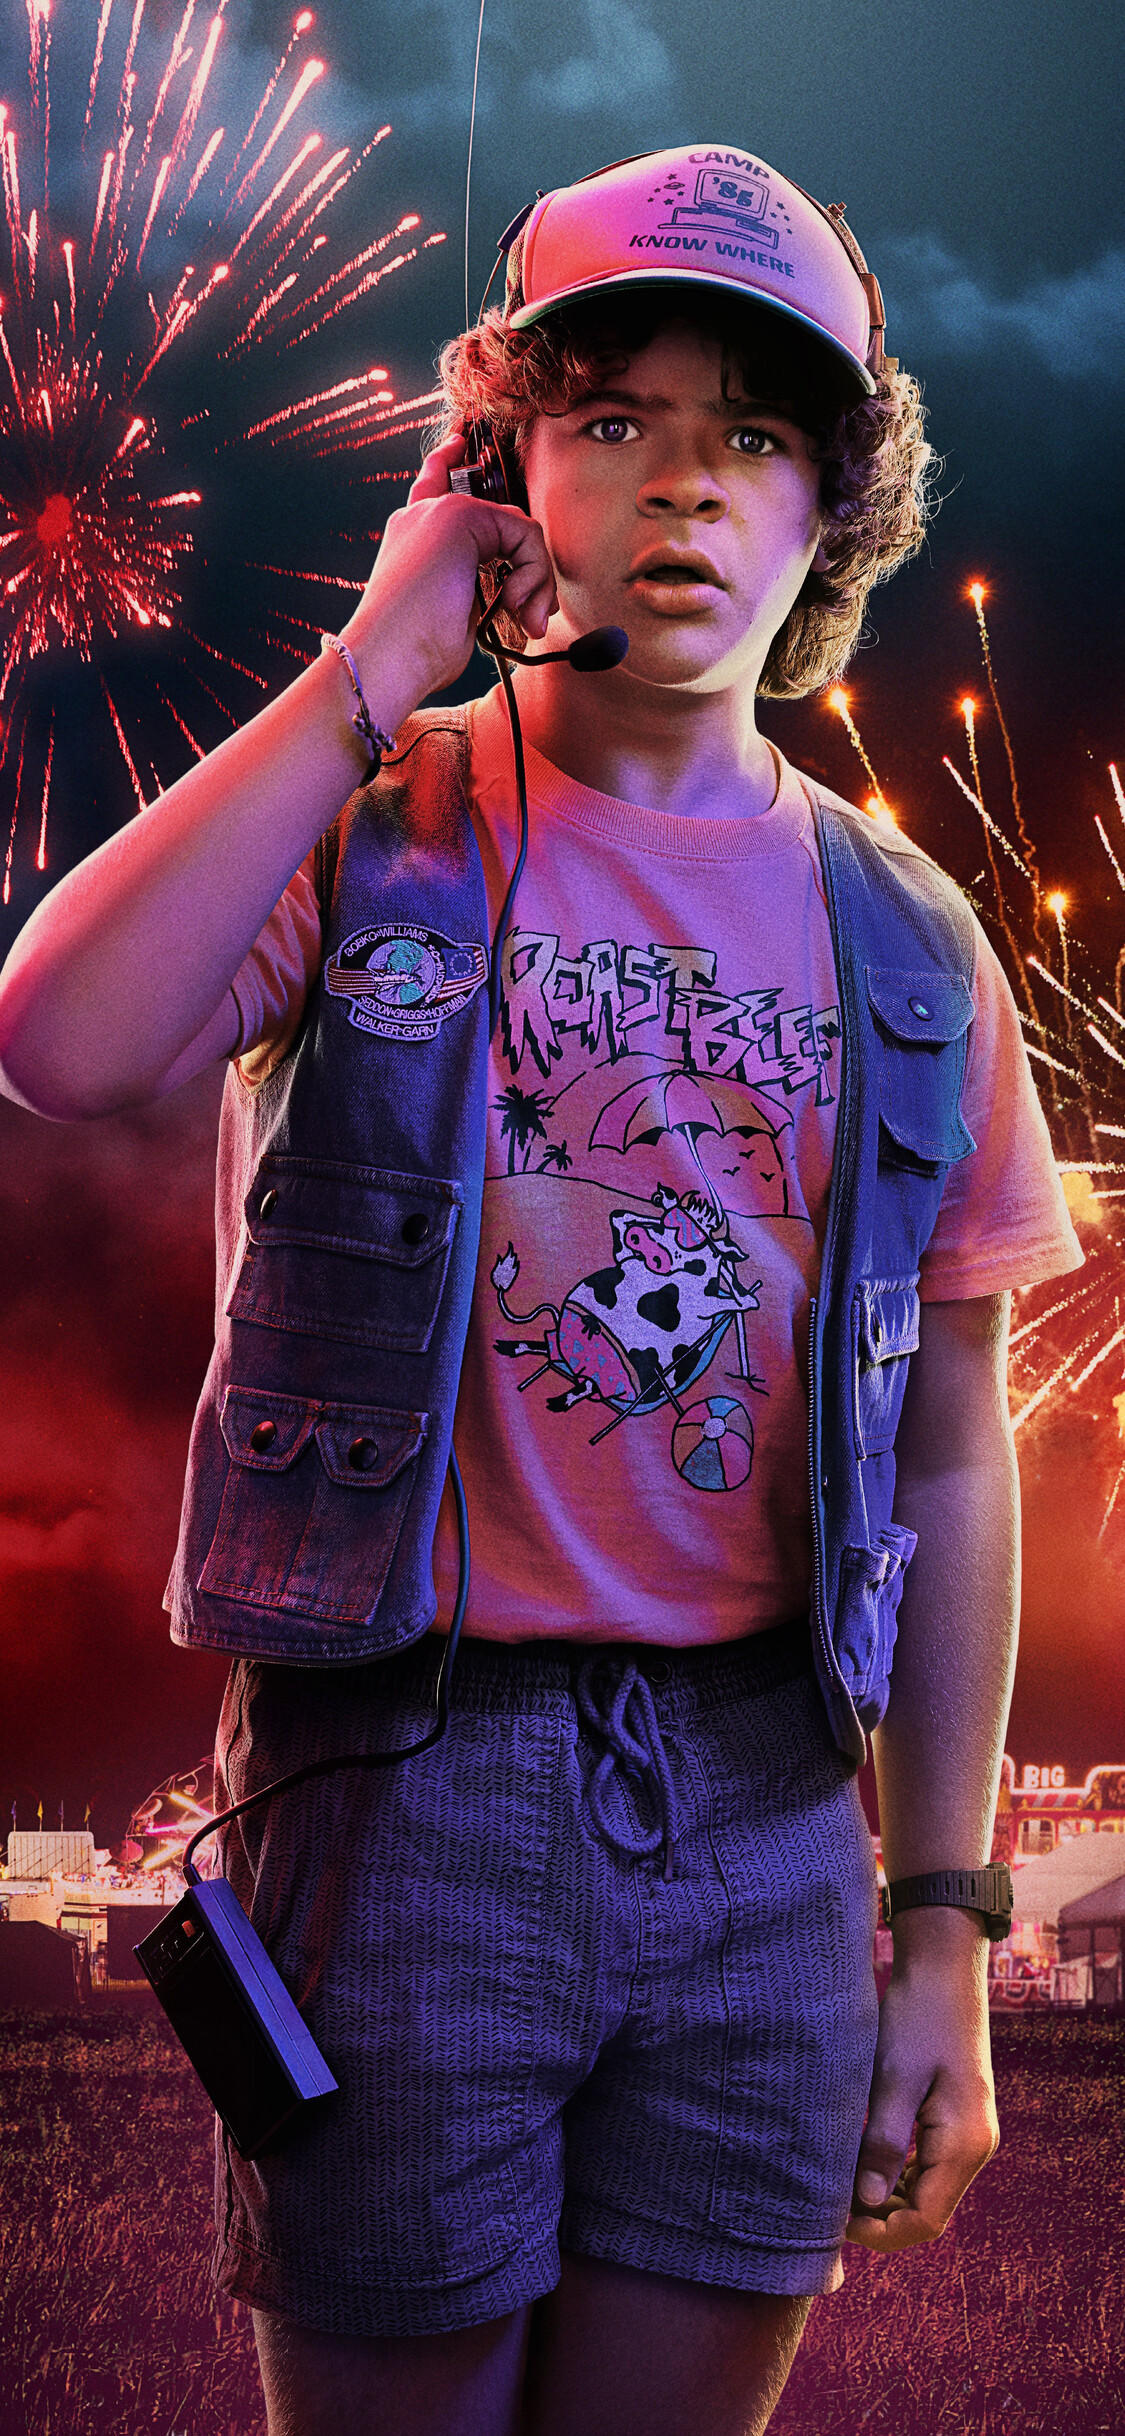 Stranger Things: Gaten Matarazzo (Dustin) was the first actor cast in the show. 1130x2440 HD Wallpaper.